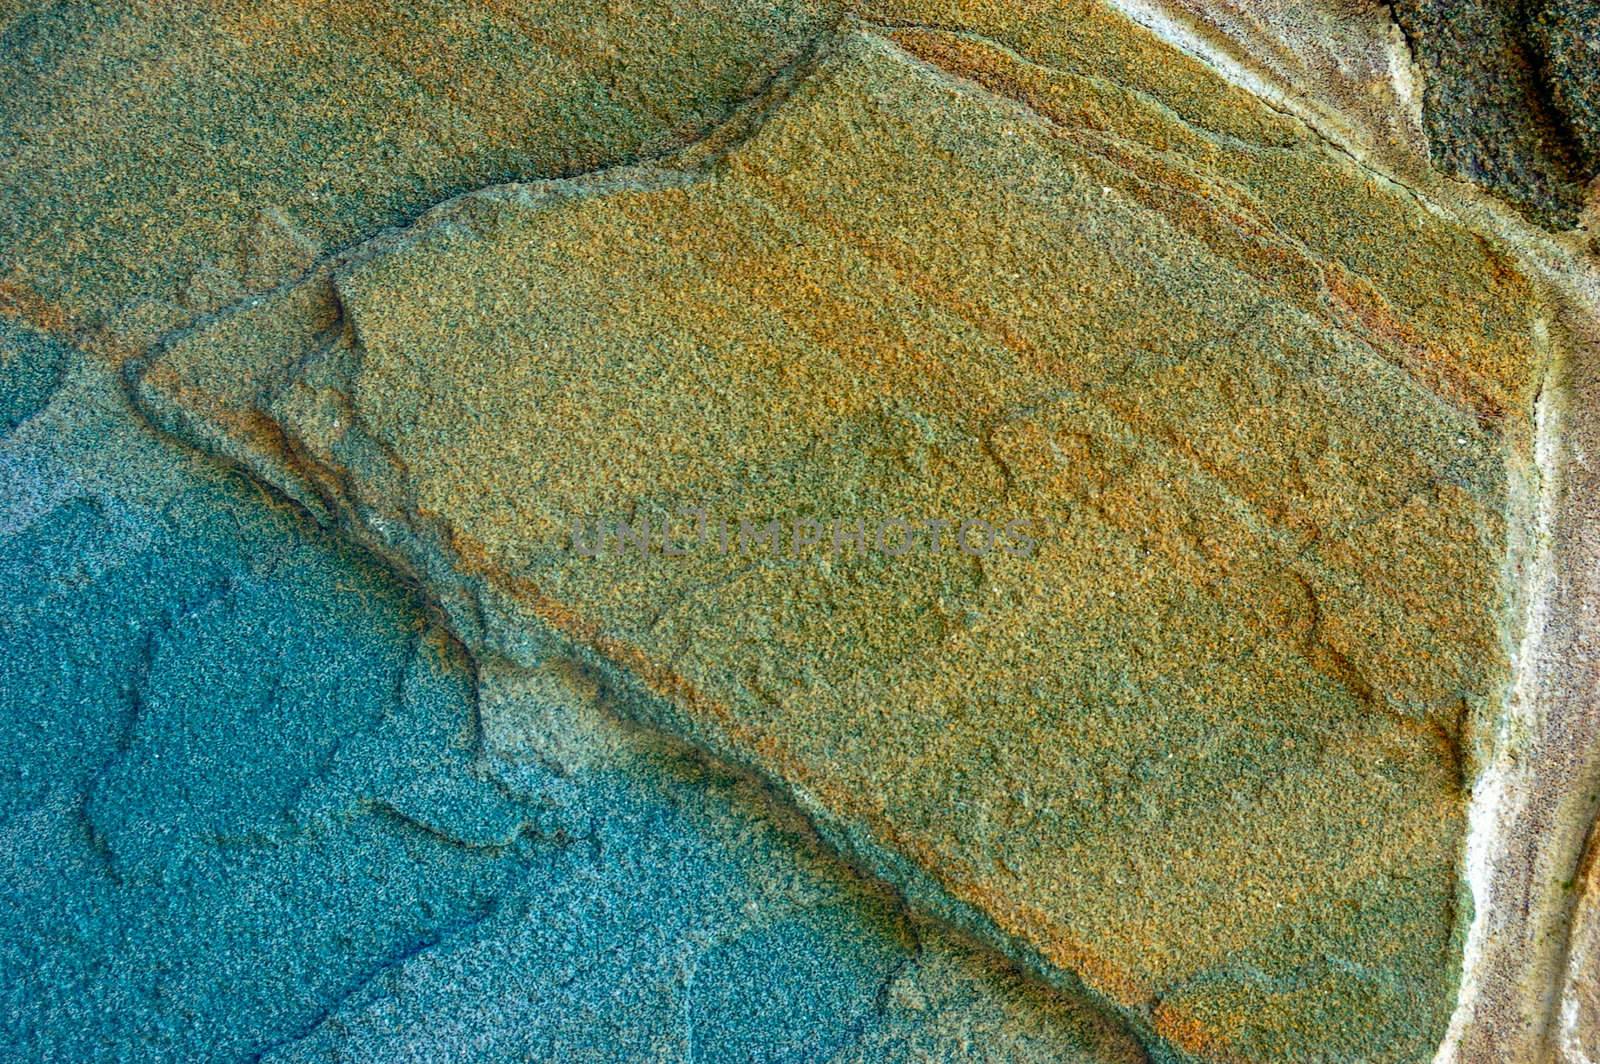 colored (prevaling blue and brown) rough stone surface